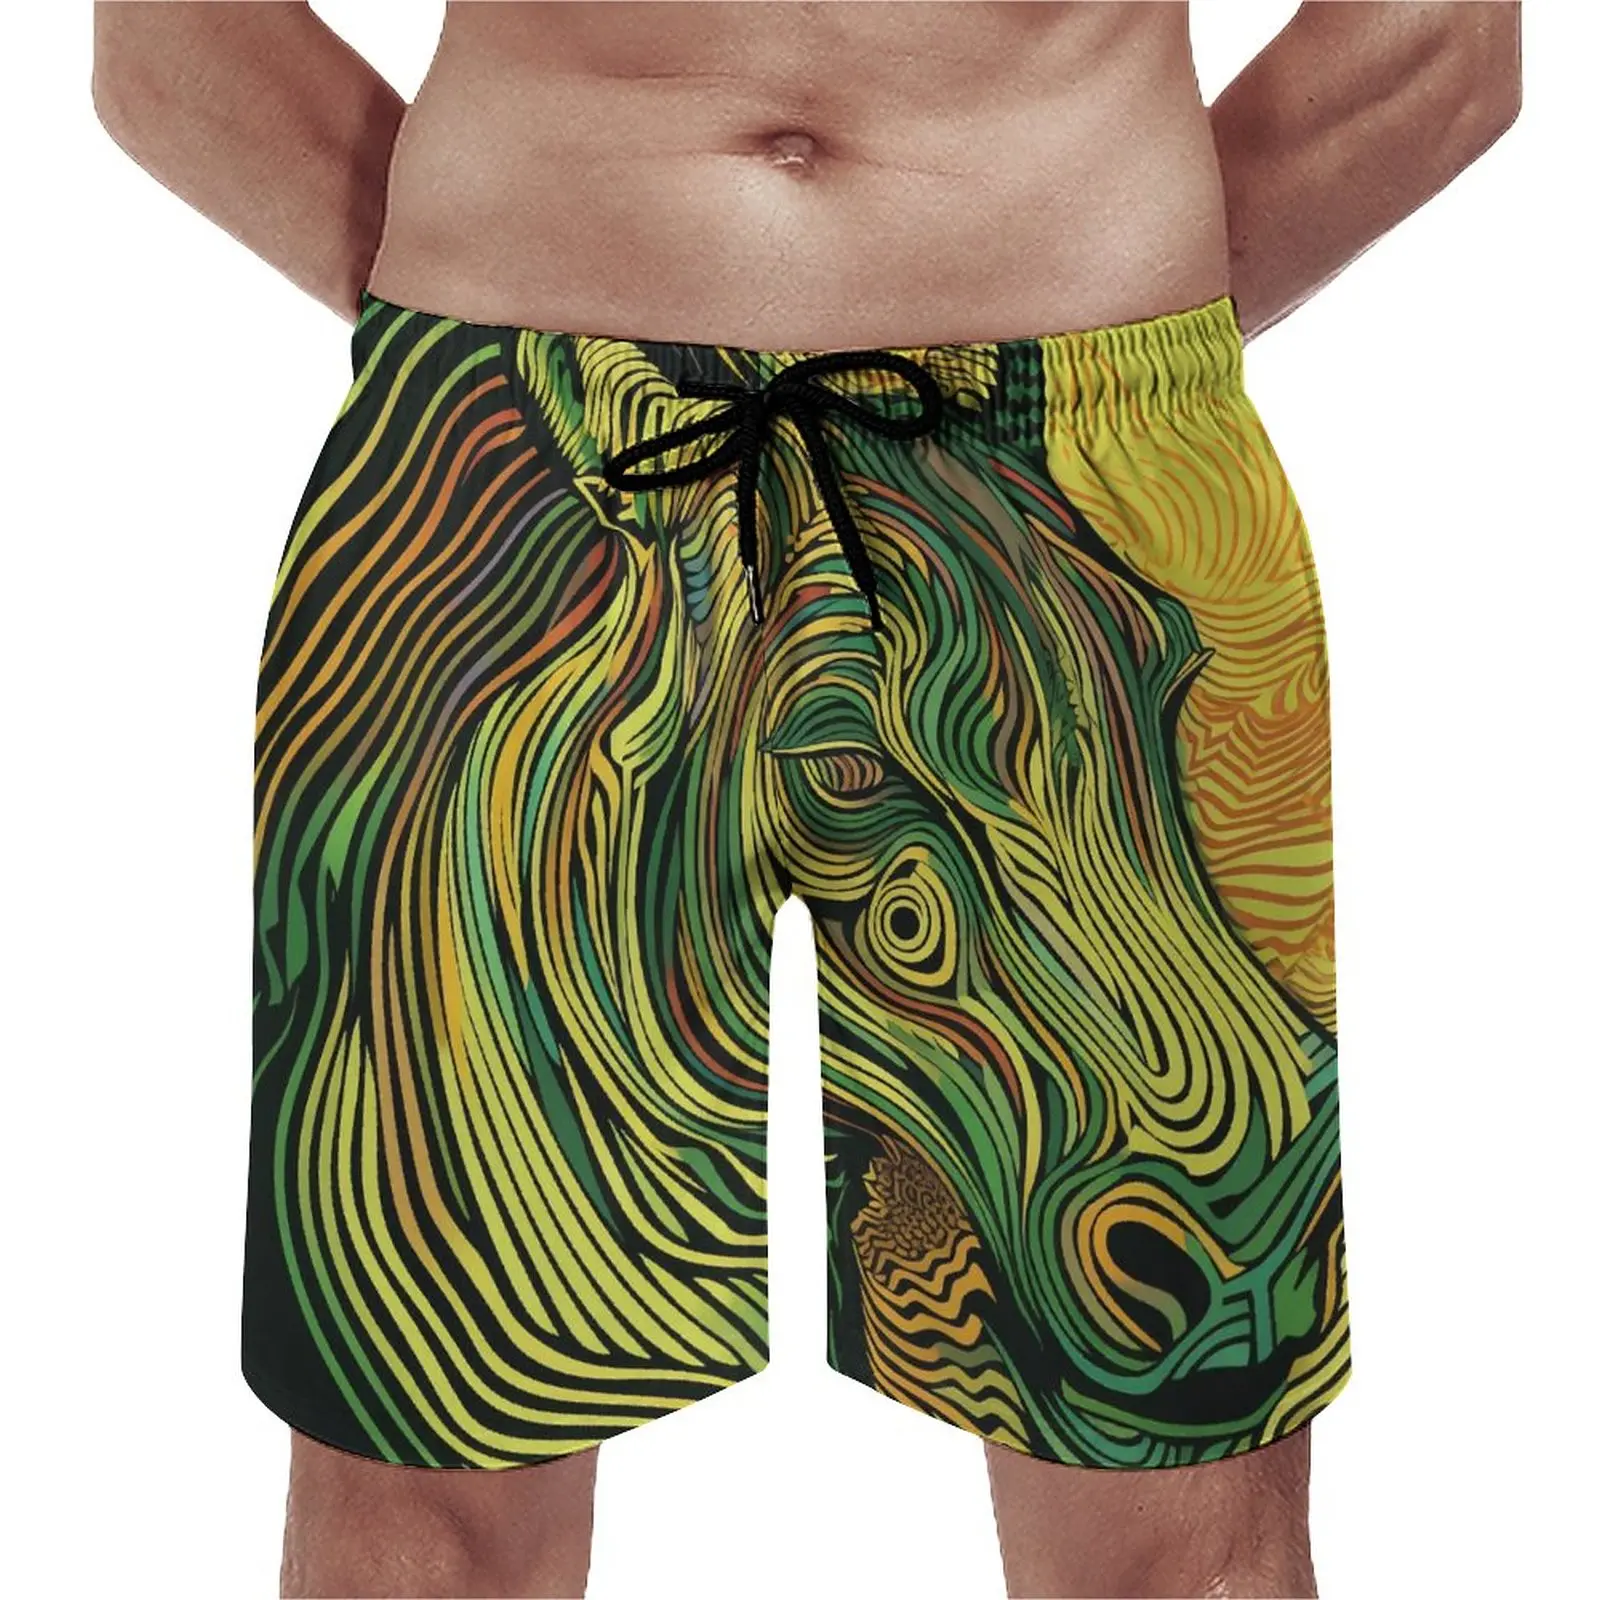 

Board Shorts Zebra Vintage Swimming Trunks Psychedelic Lines Portraits Men Quick Dry Sports Trendy Large Size Beach Short Pants